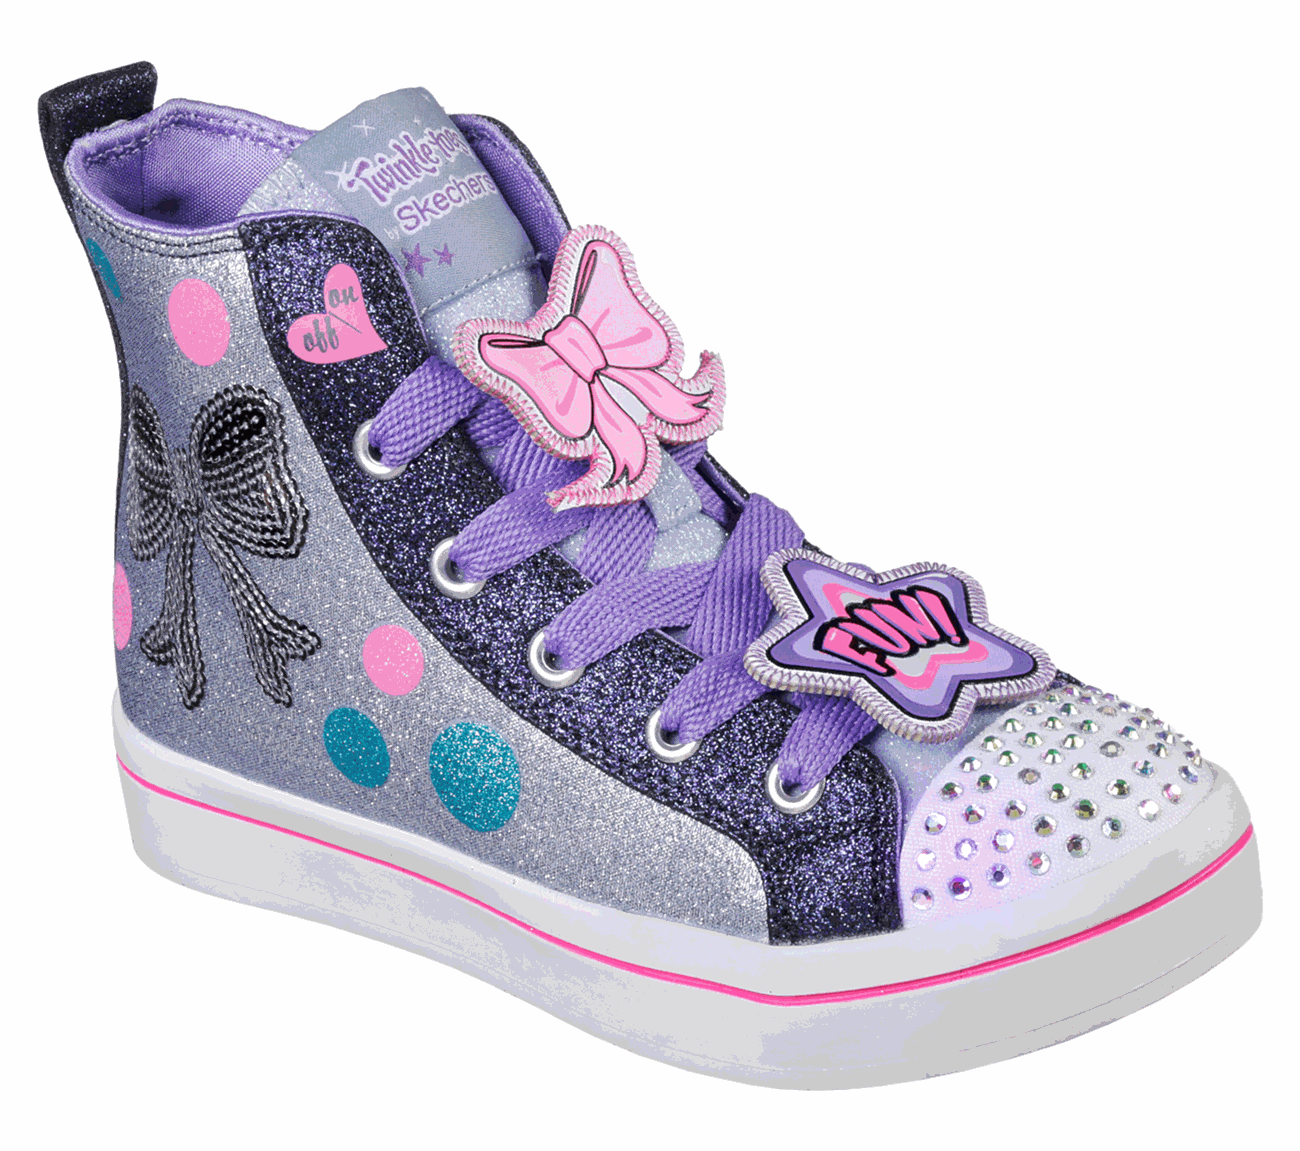 Buy SKECHERS Twinkle Toes: Twi-Lites - Dazzle Bows S-Lights Shoes